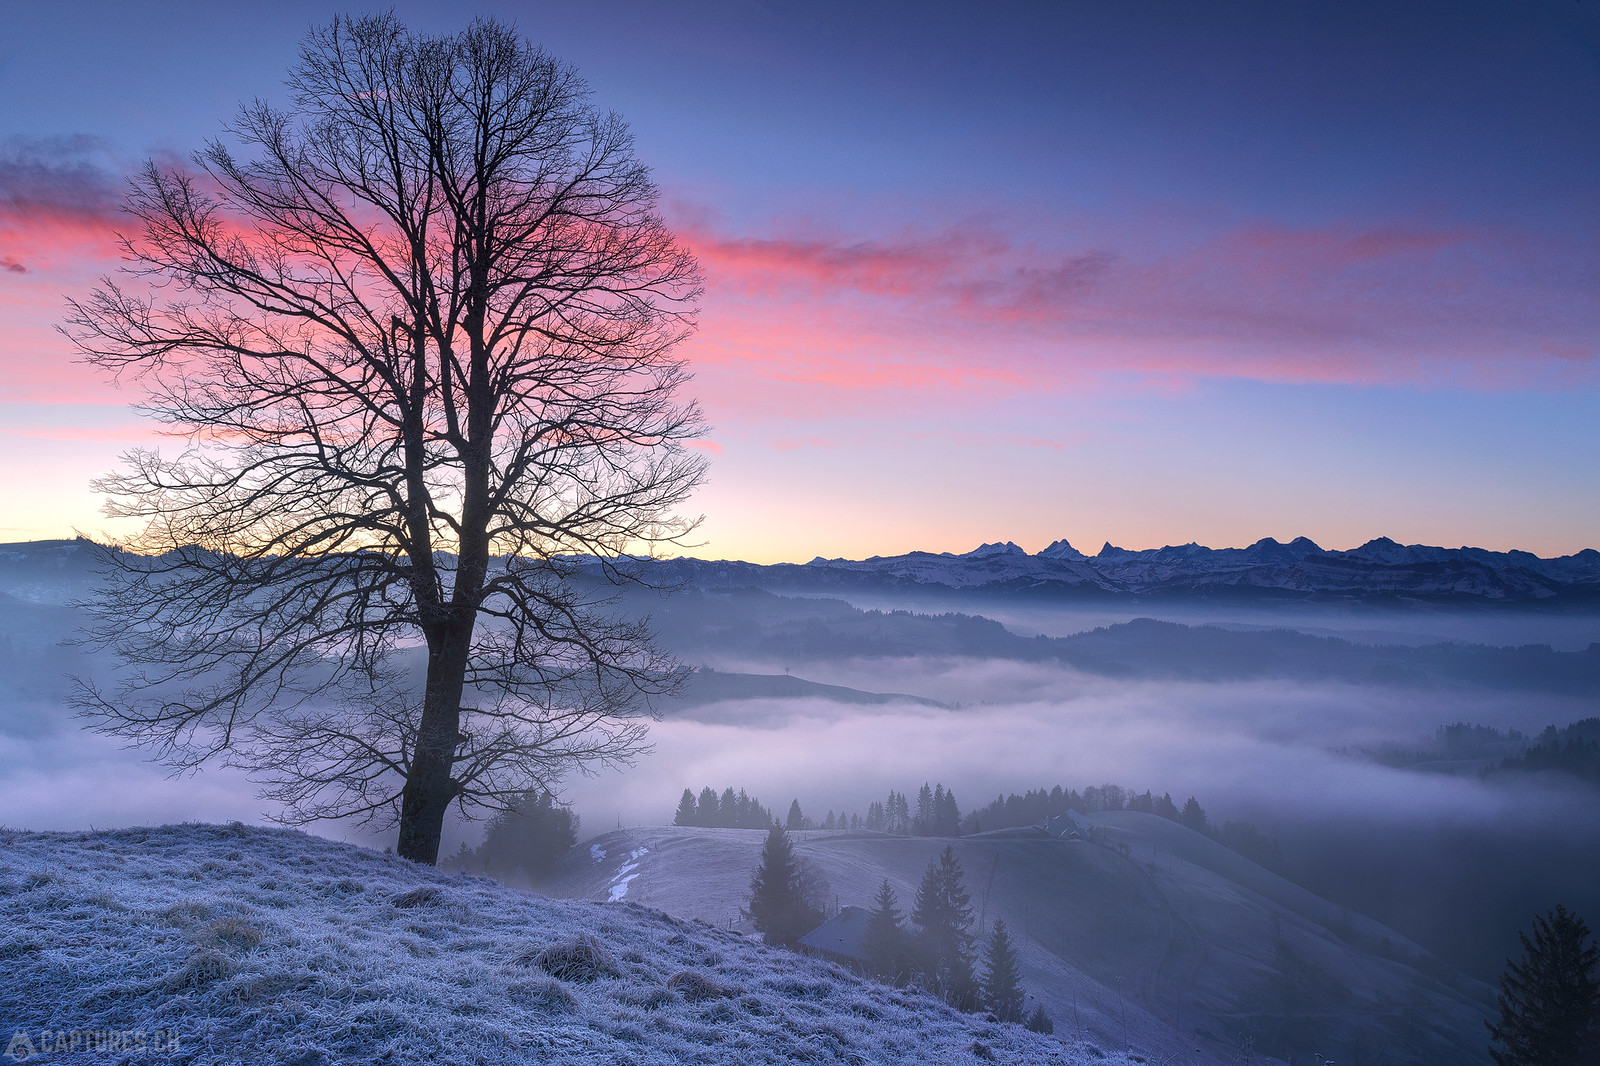 Dawn and the tree - Lüderenalp